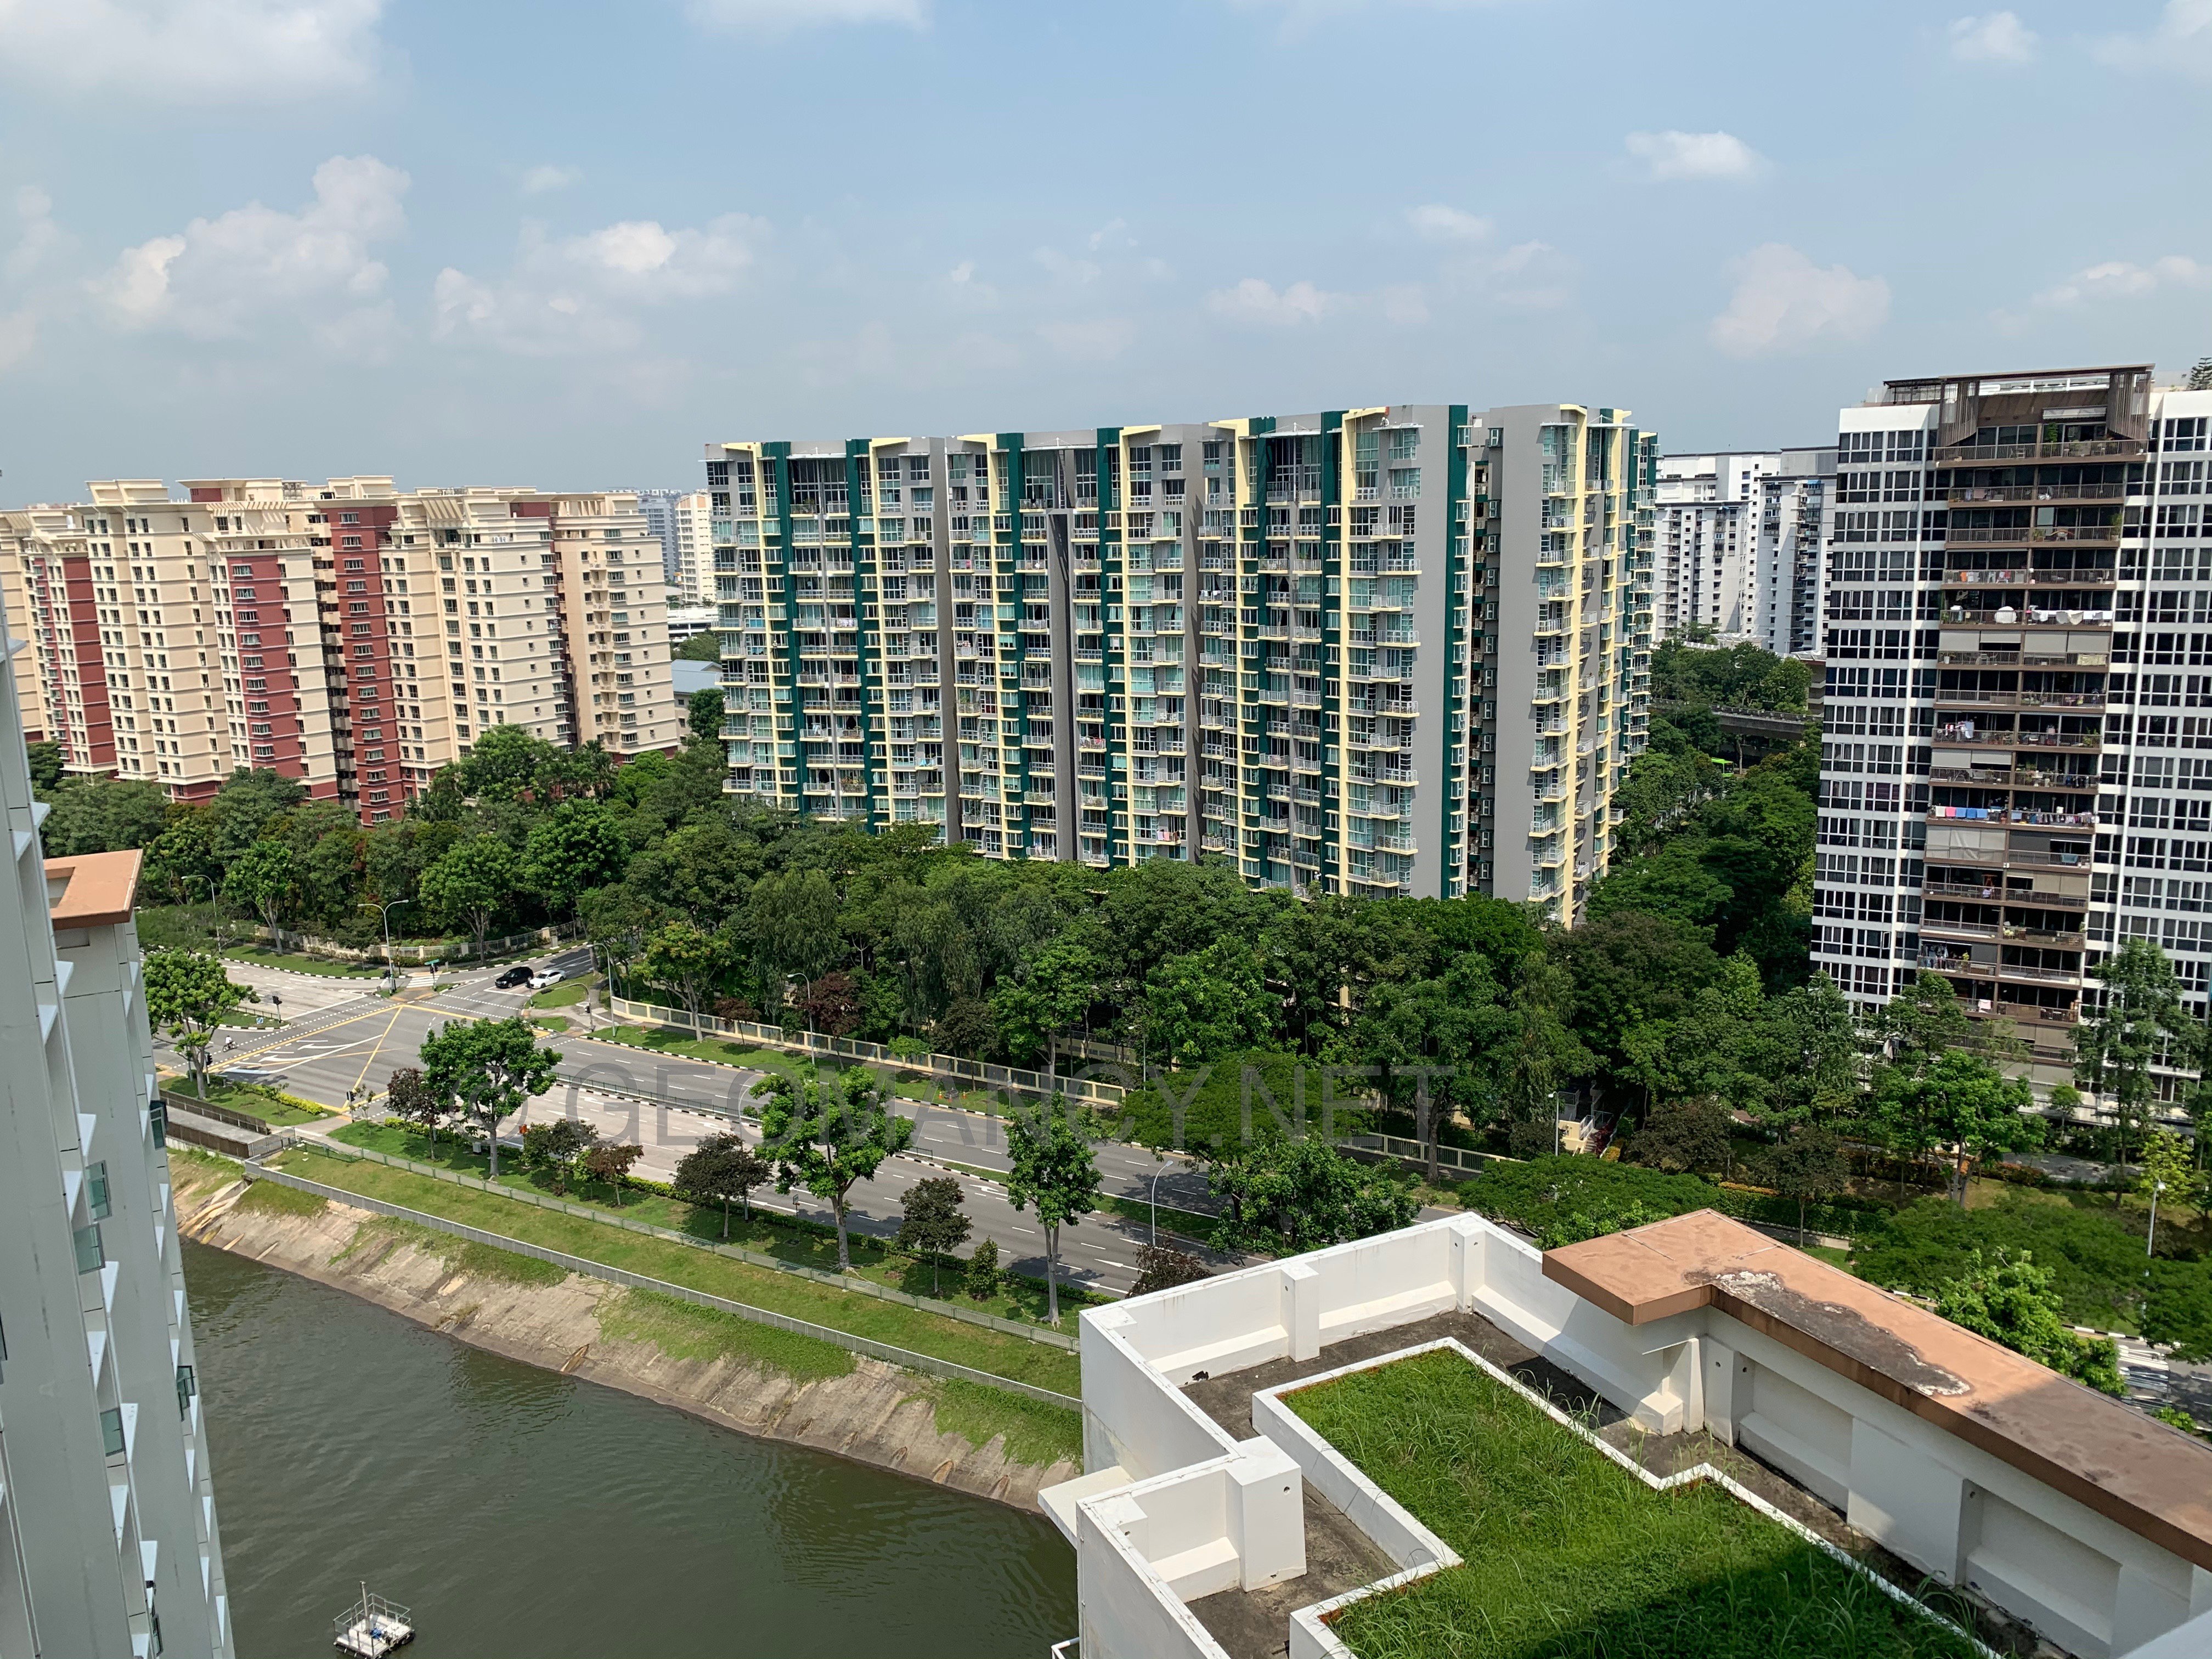 HDB Hougang Parkview BTO launched in April 2011 site plan